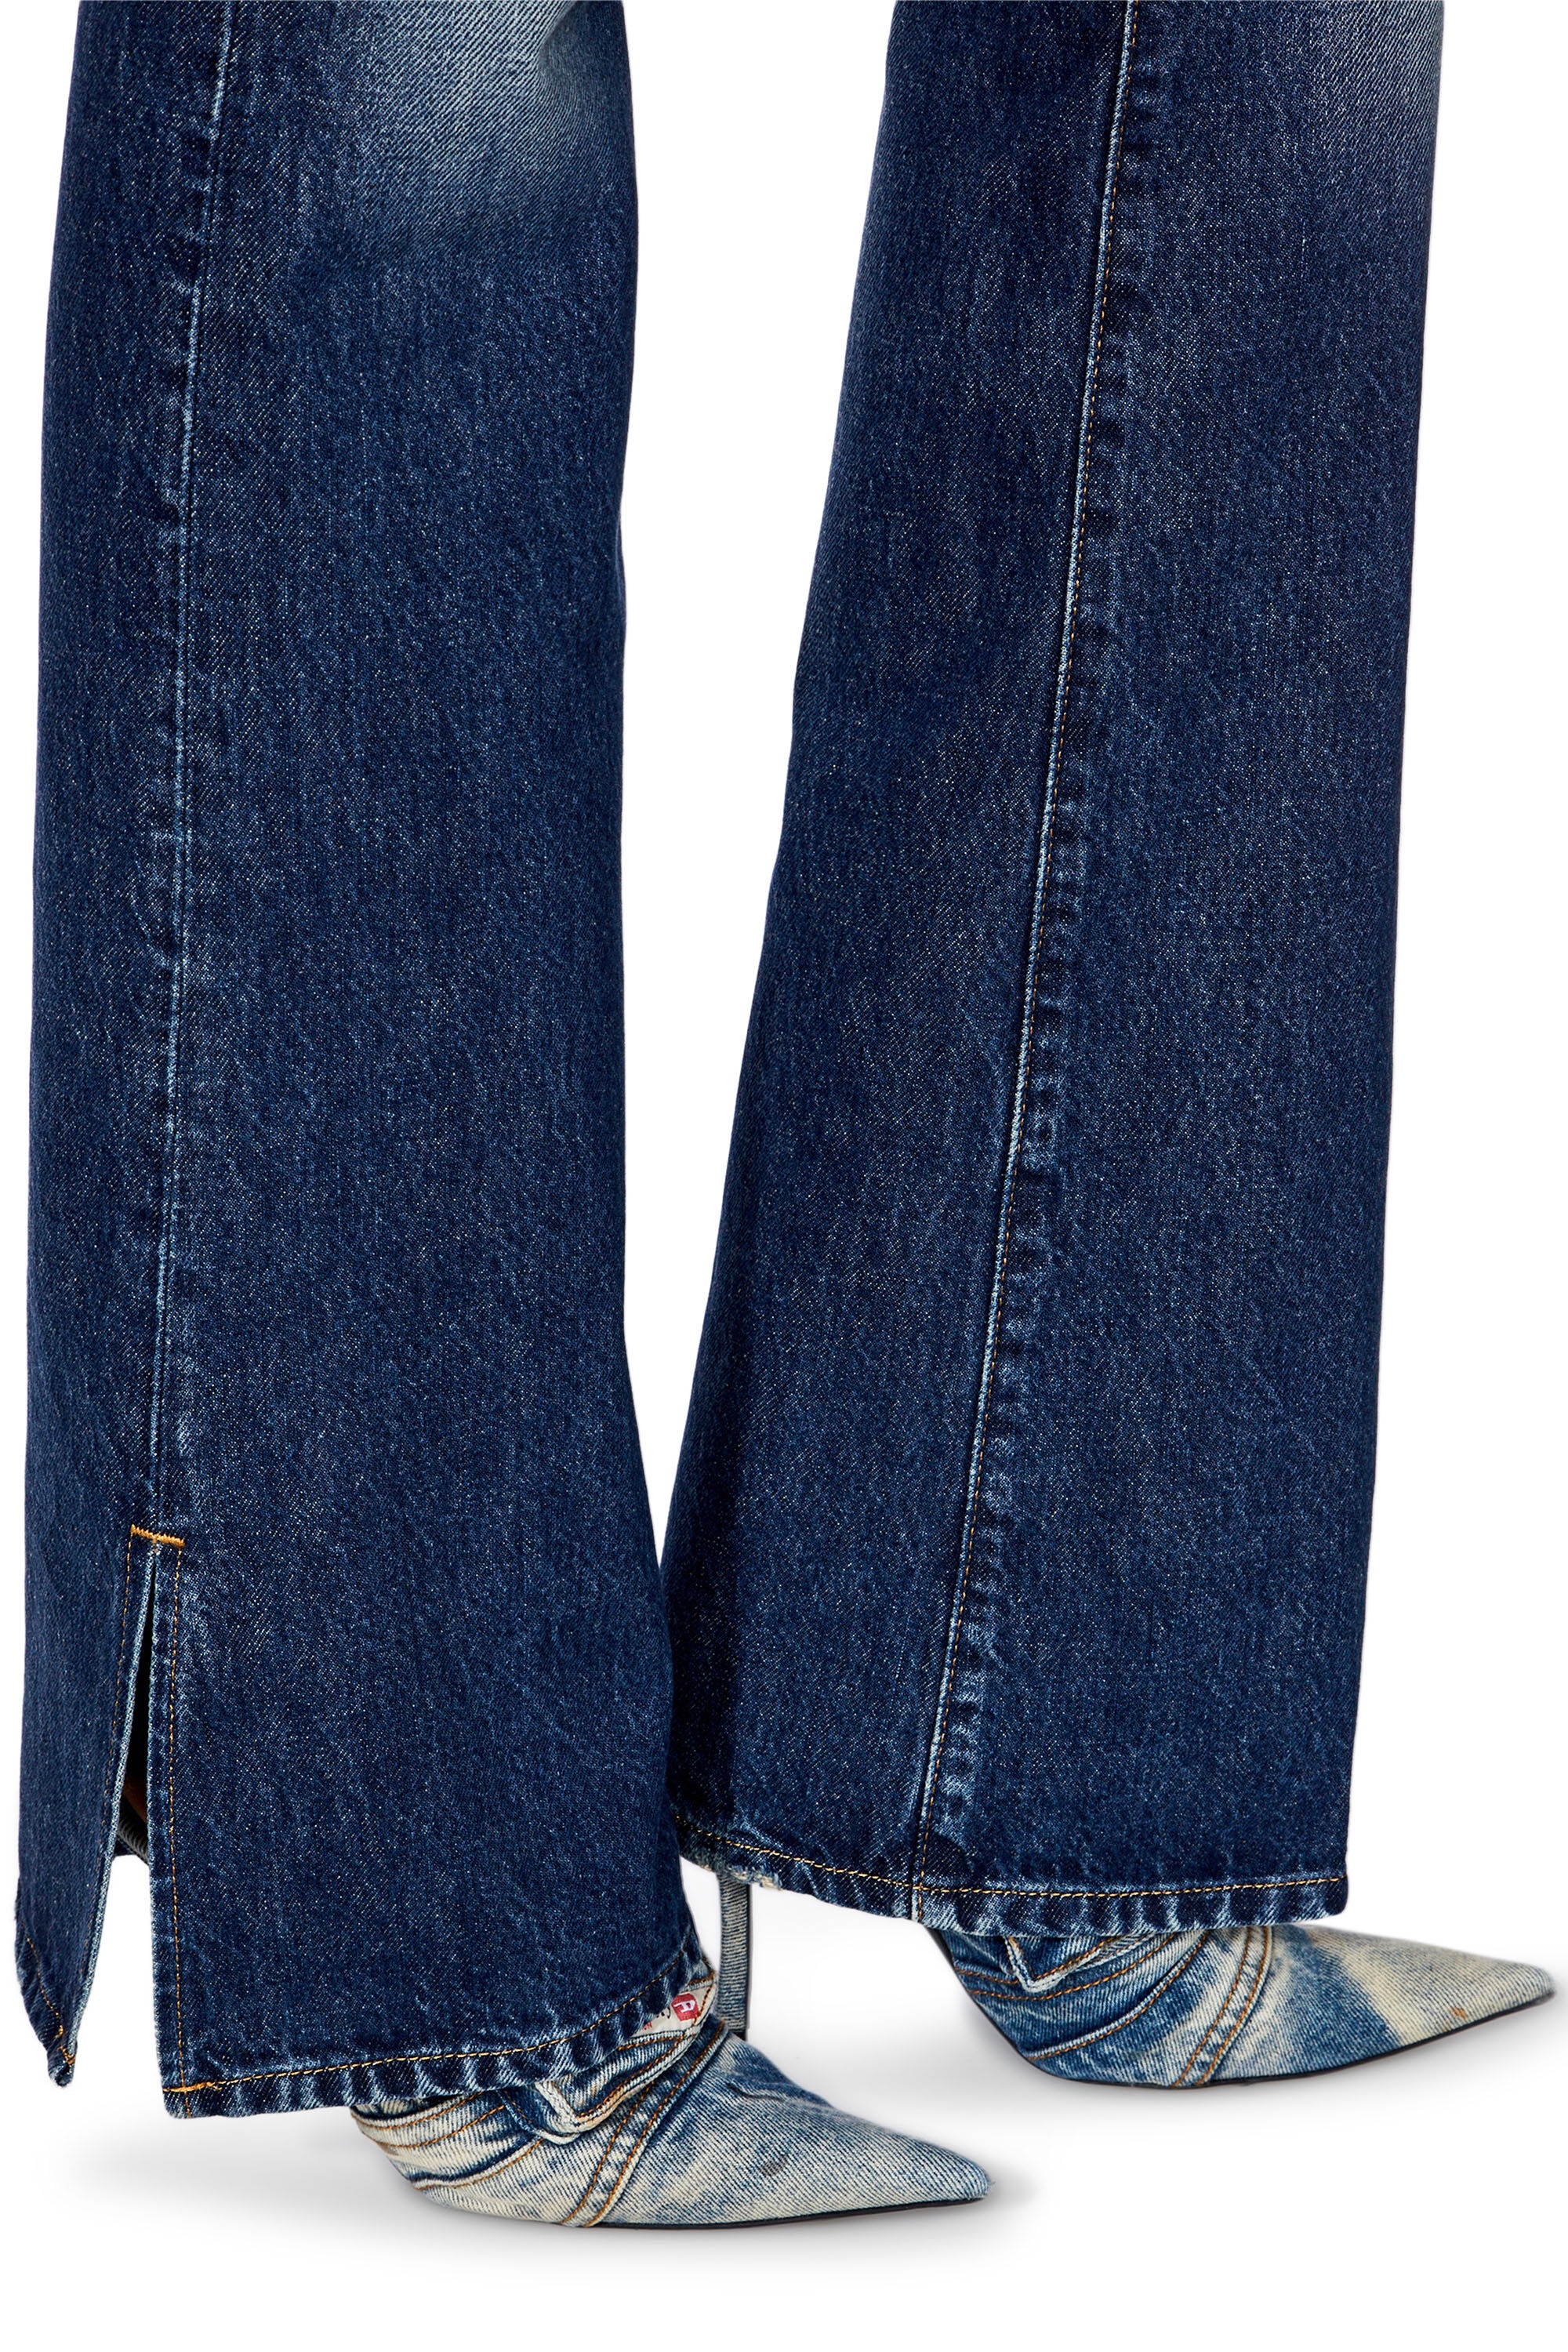 BOOTCUT AND FLARE JEANS 1969 D-EBBEY 09G92 - 4